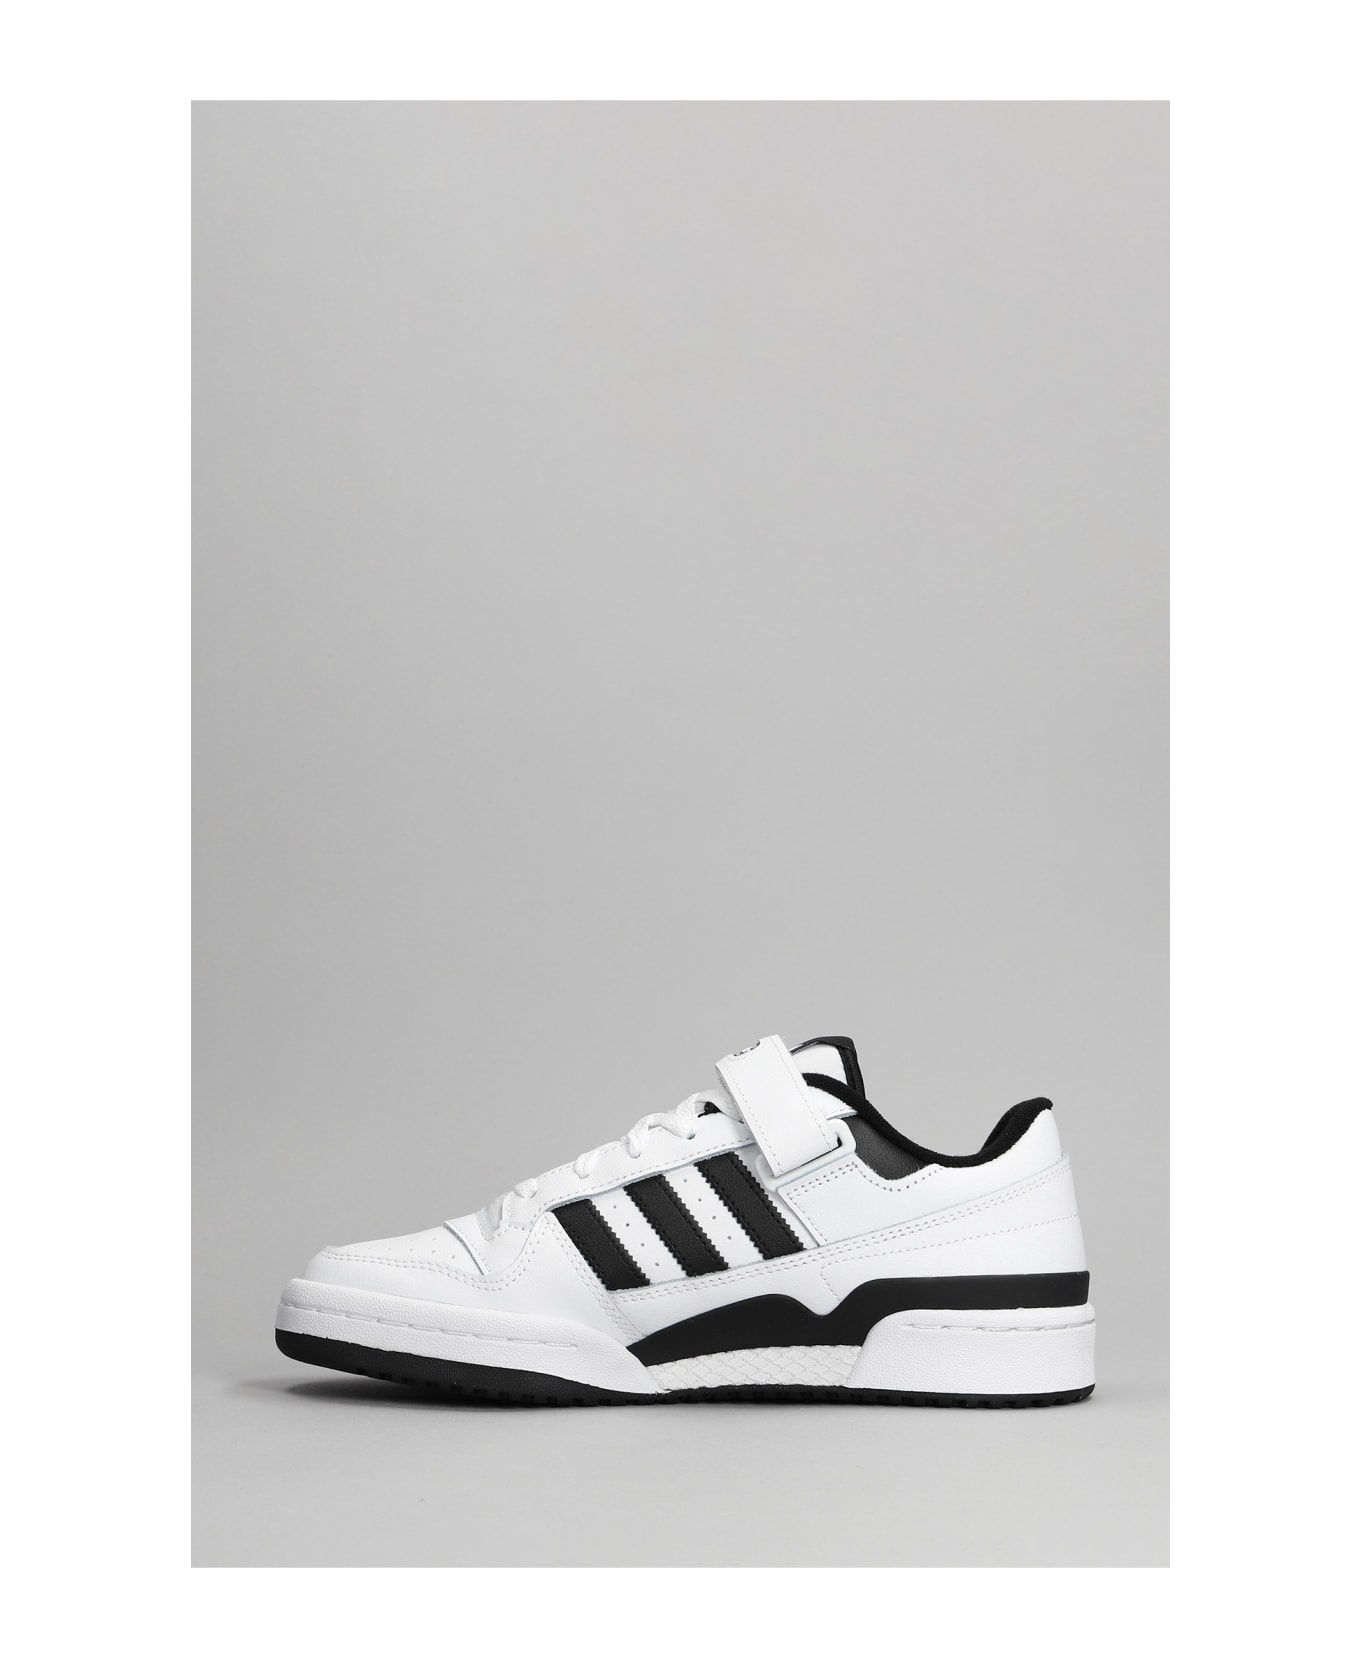 Adidas Originals Forum Low Sneakers In White Leather - FTWWHT/FTWWHT/CBLACK